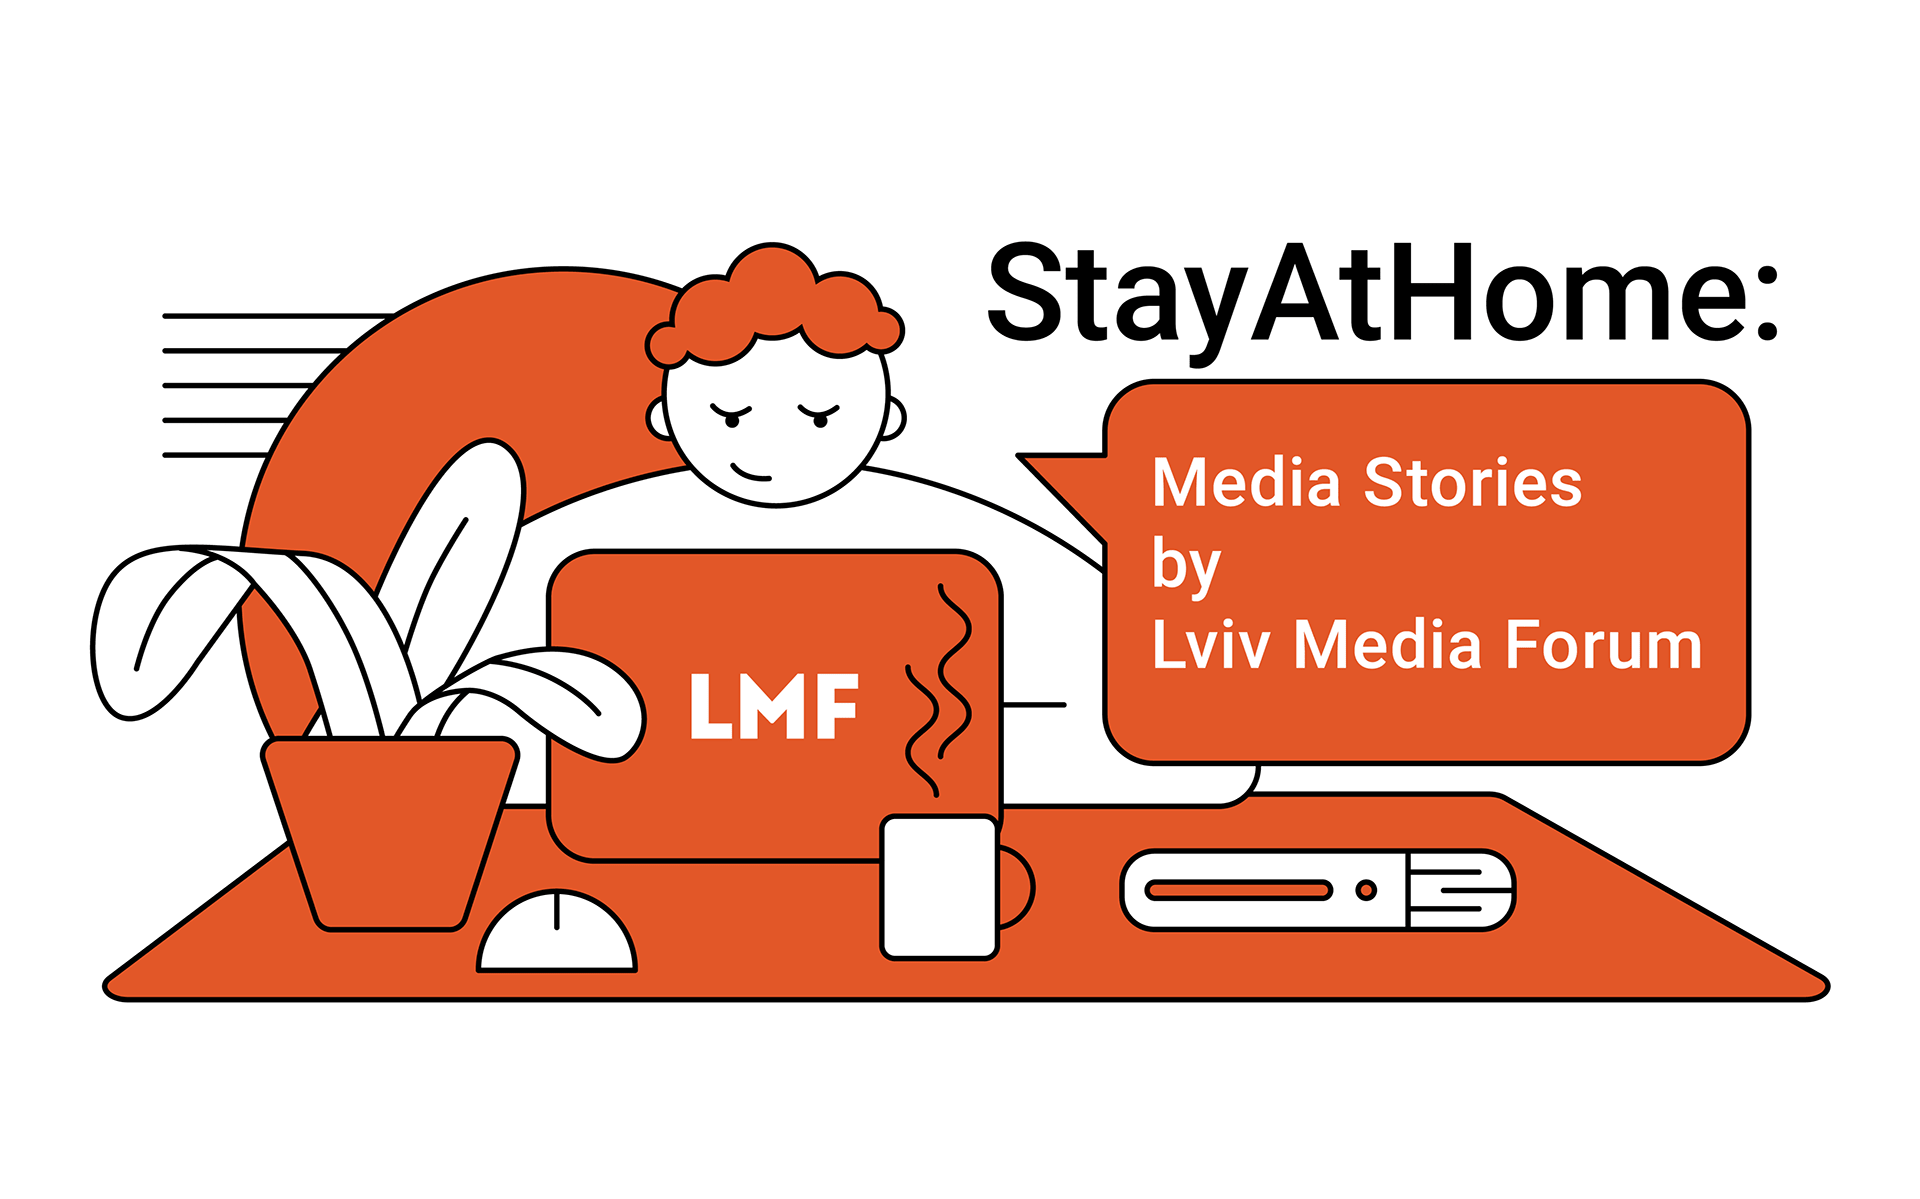 Join our new #StayAtHome Media Stories by LMF project